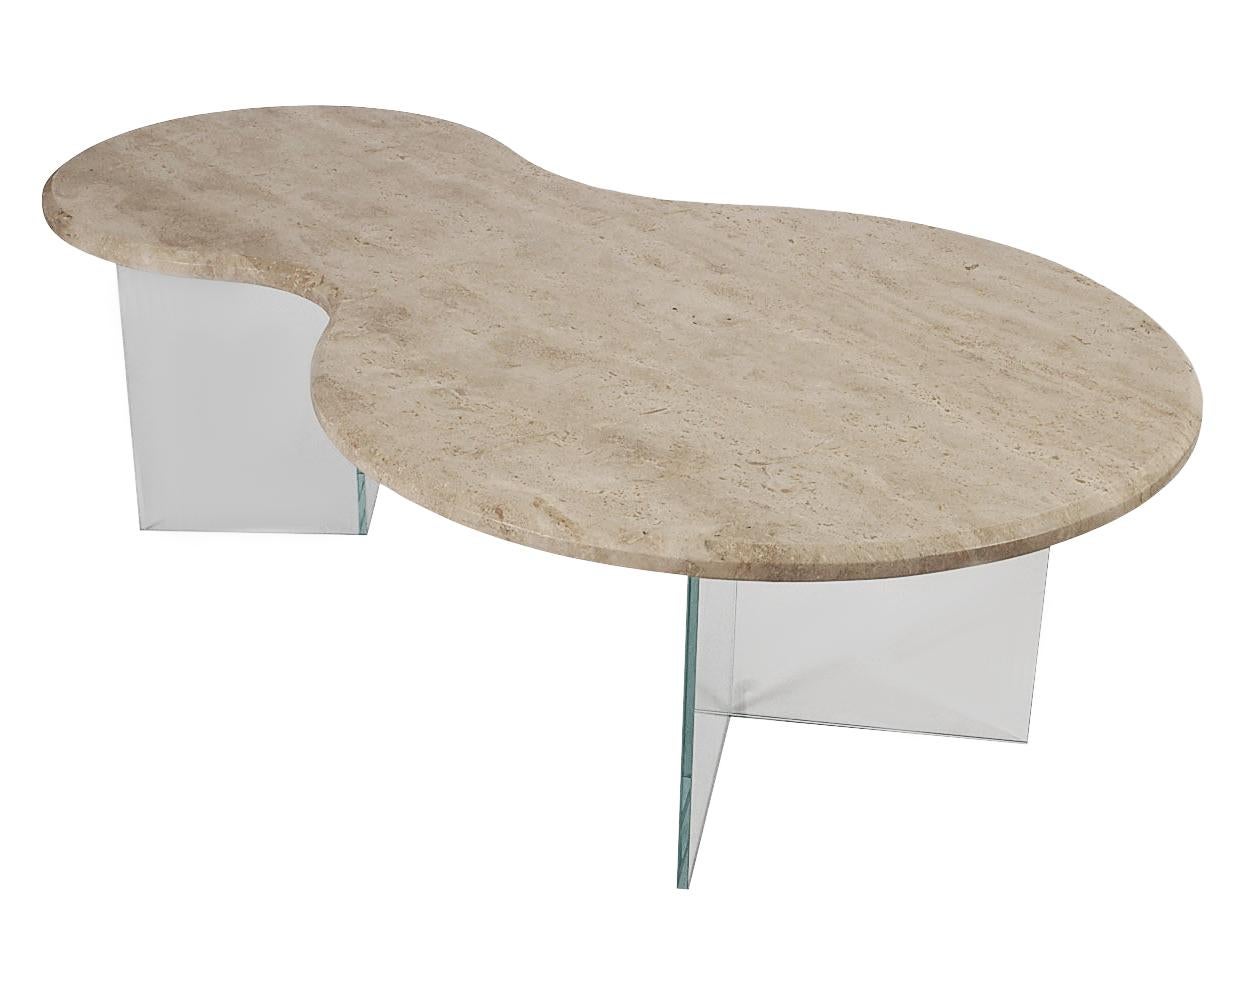 Late 20th Century Mid Century Italian Modern Floating Travertine Marble Free Form Cocktail Table For Sale